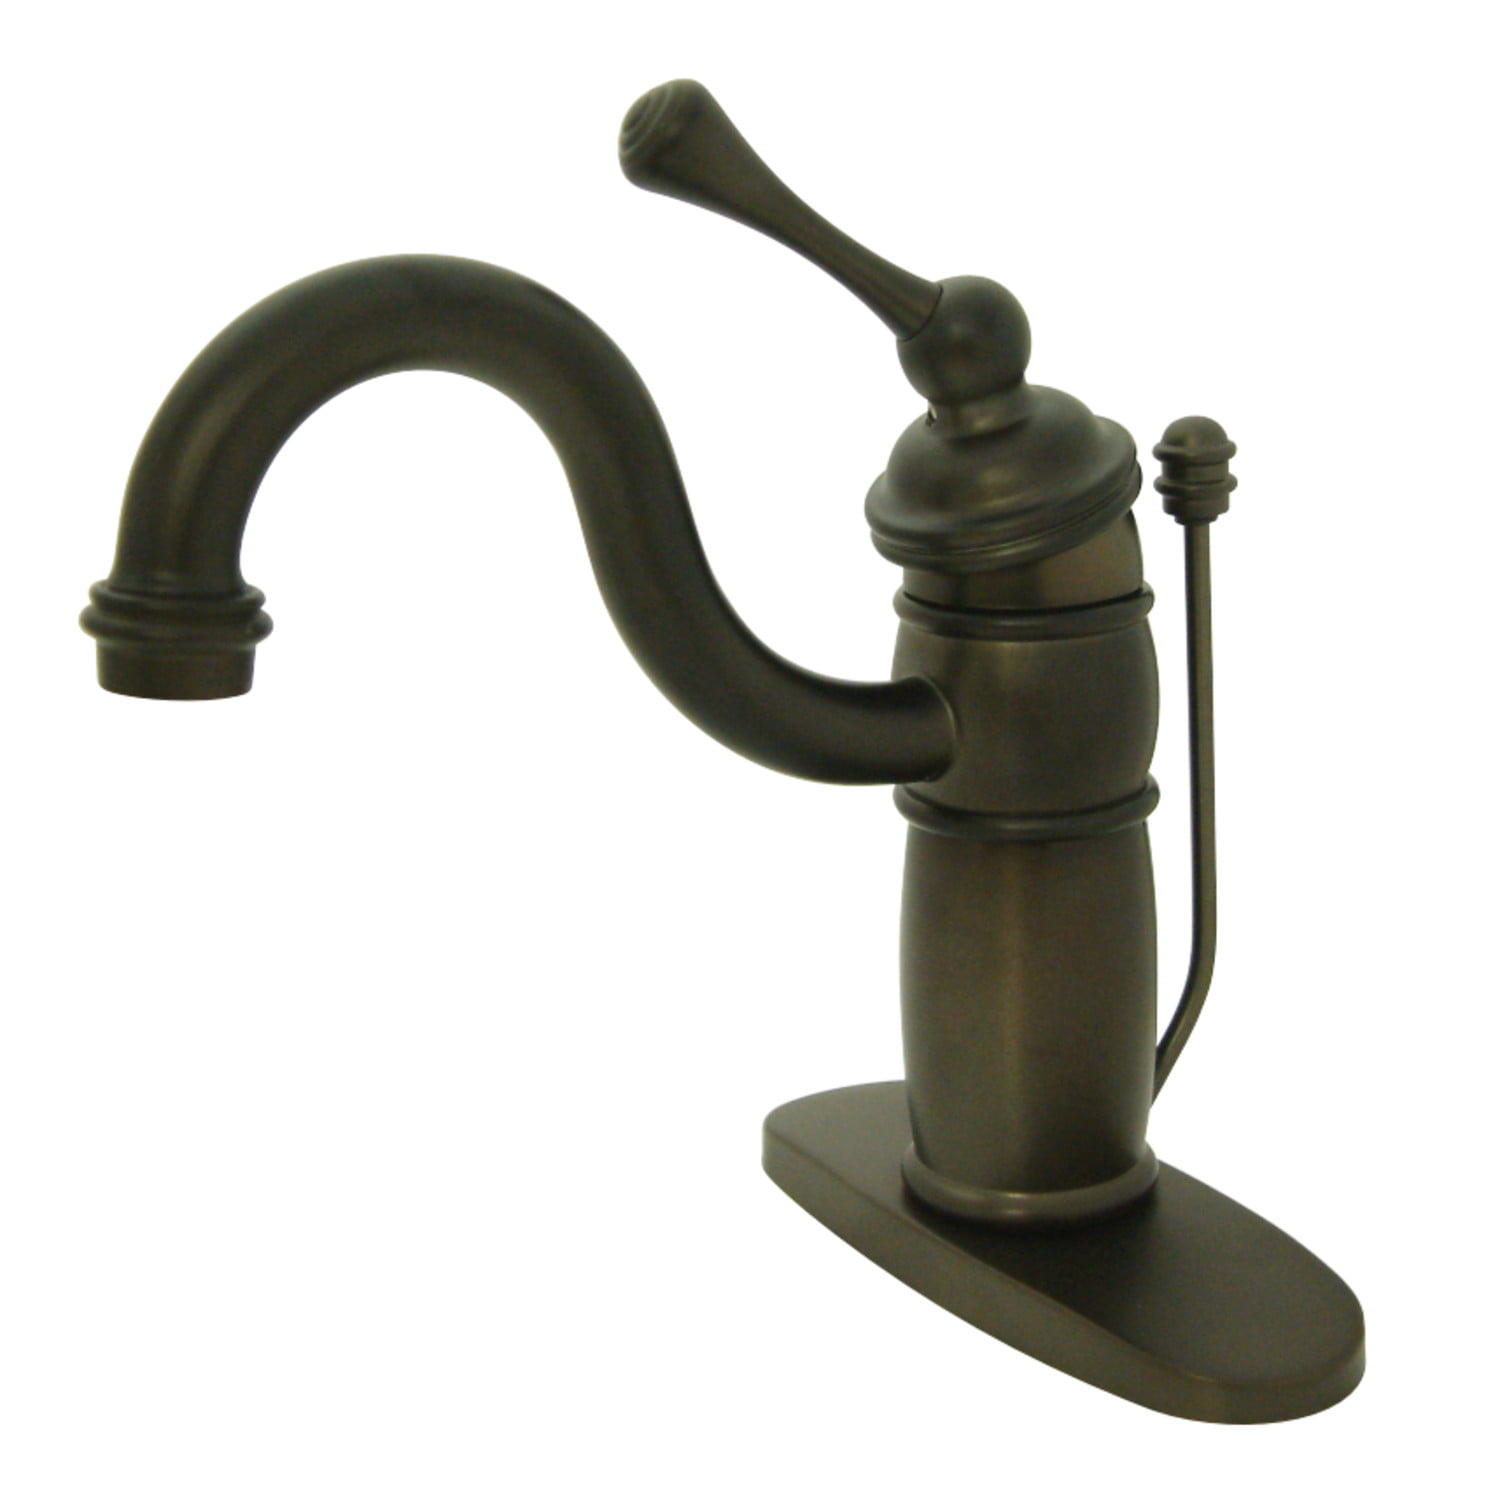 Kingston Brass KB1405BL Victorian Single-Handle Bathroom Faucet with Pop-Up Drain, Oil Rubbed Bronze